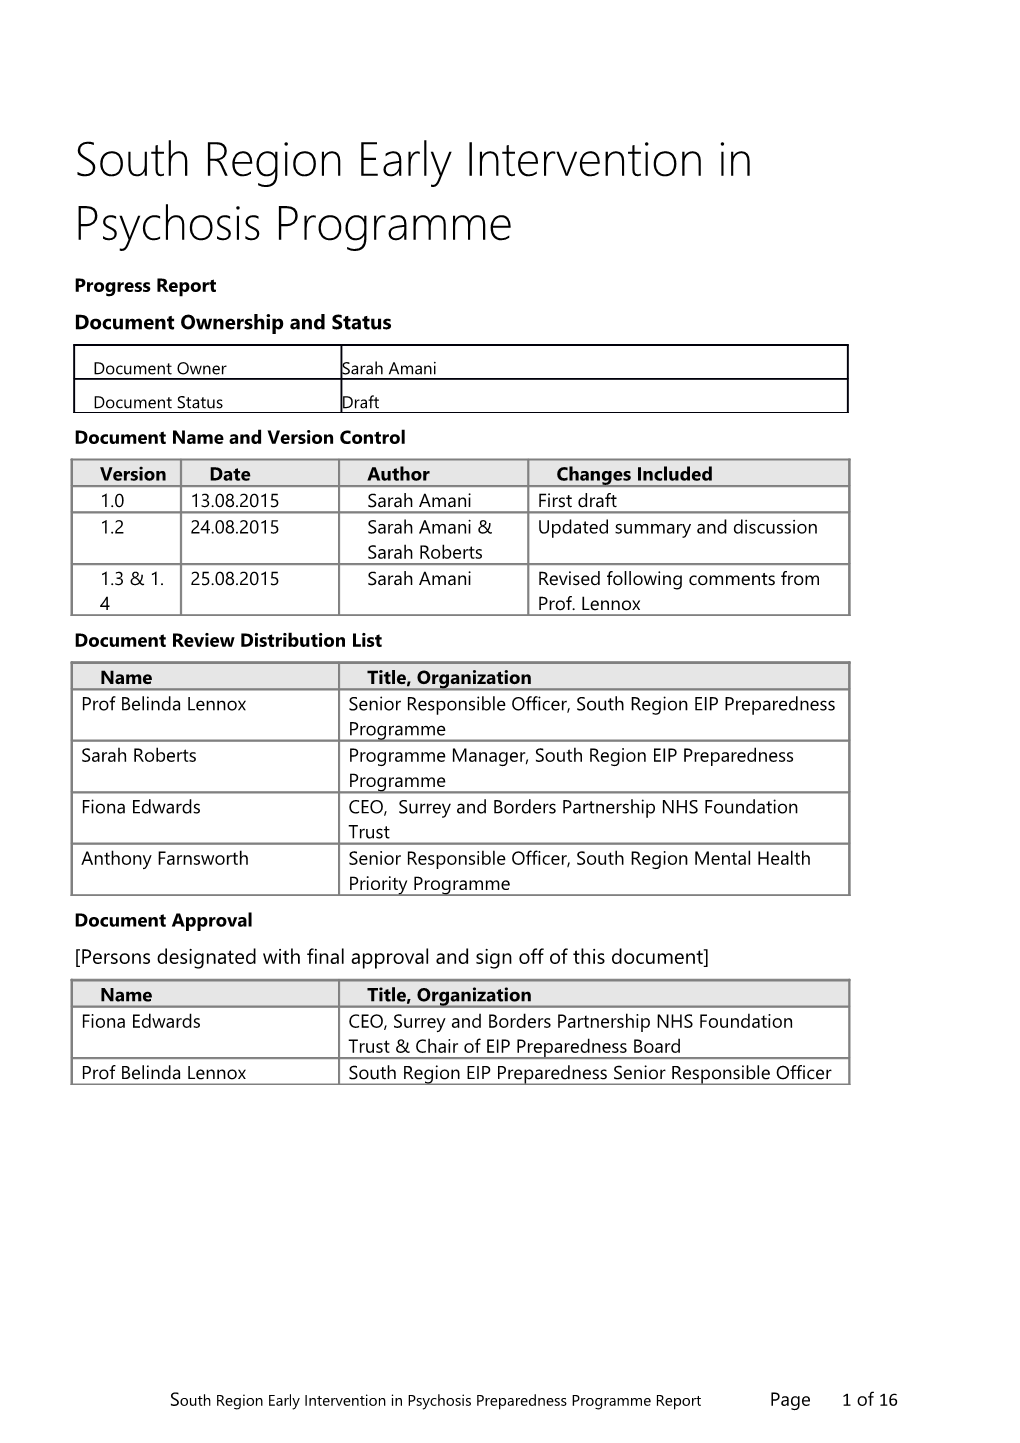 South Region Early Intervention in Psychosis Programme